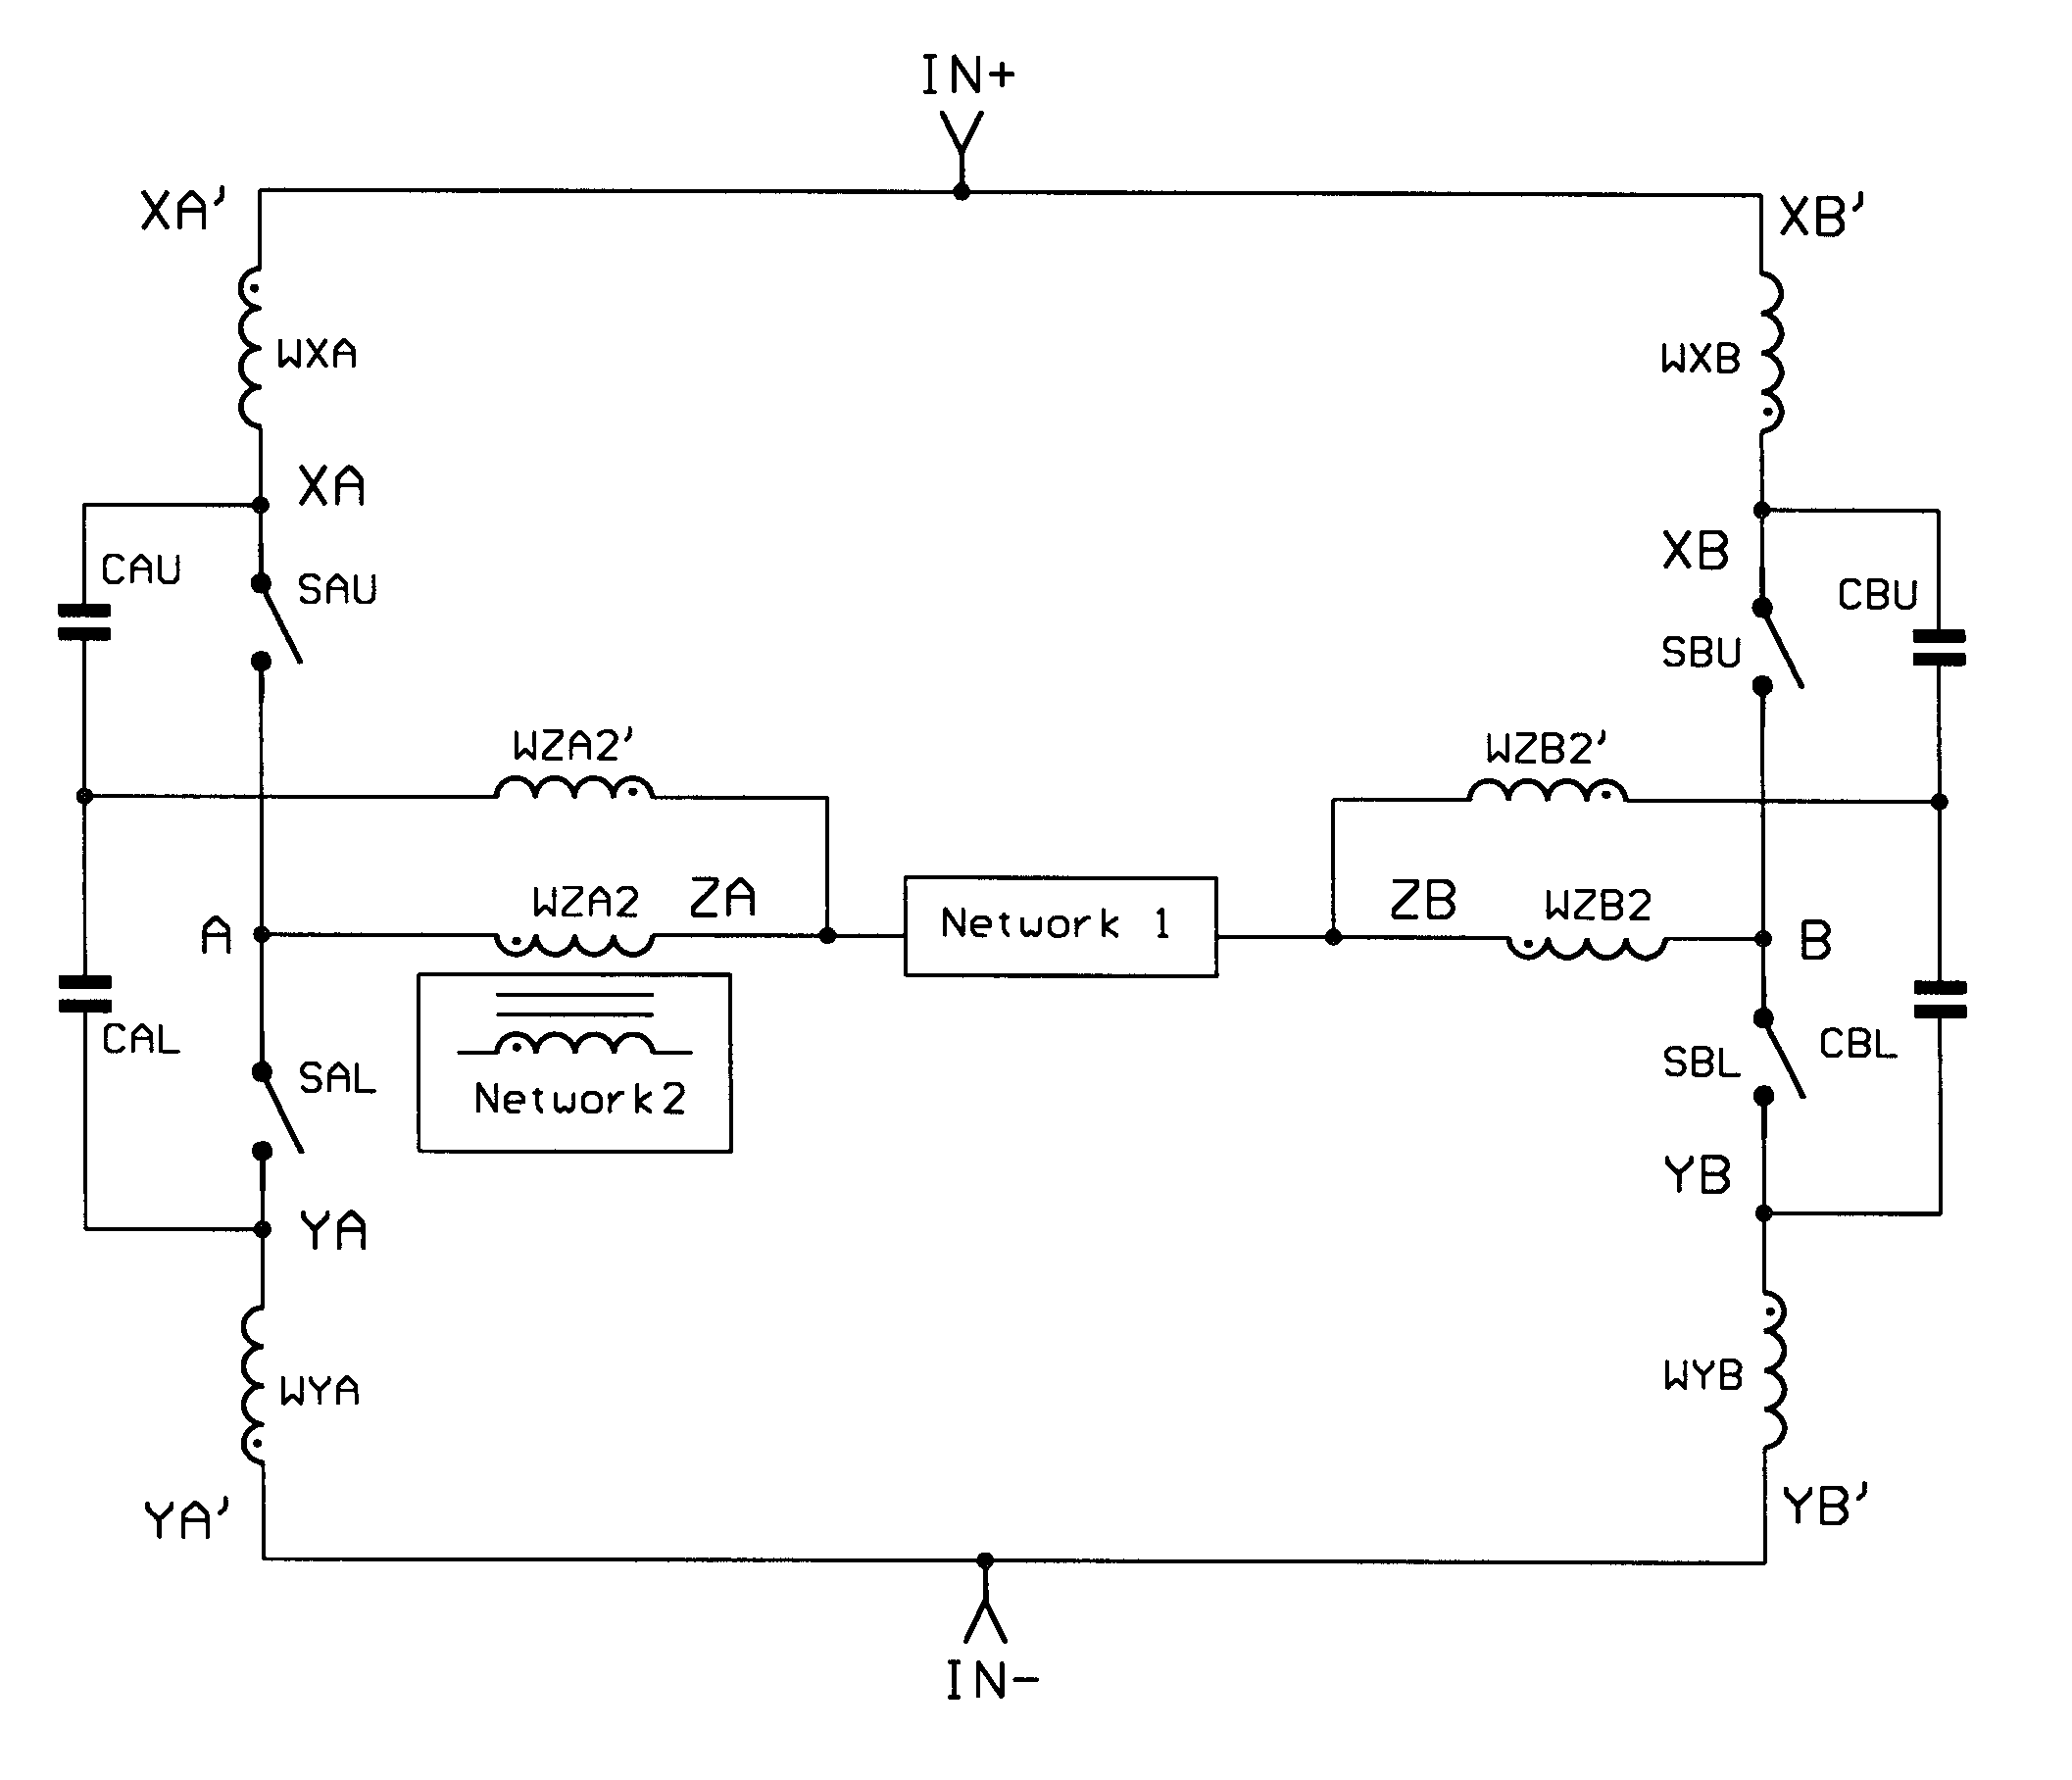 Synthesis methods for enhancing electromagnetic compatibility and AC performance of power conversion circuits